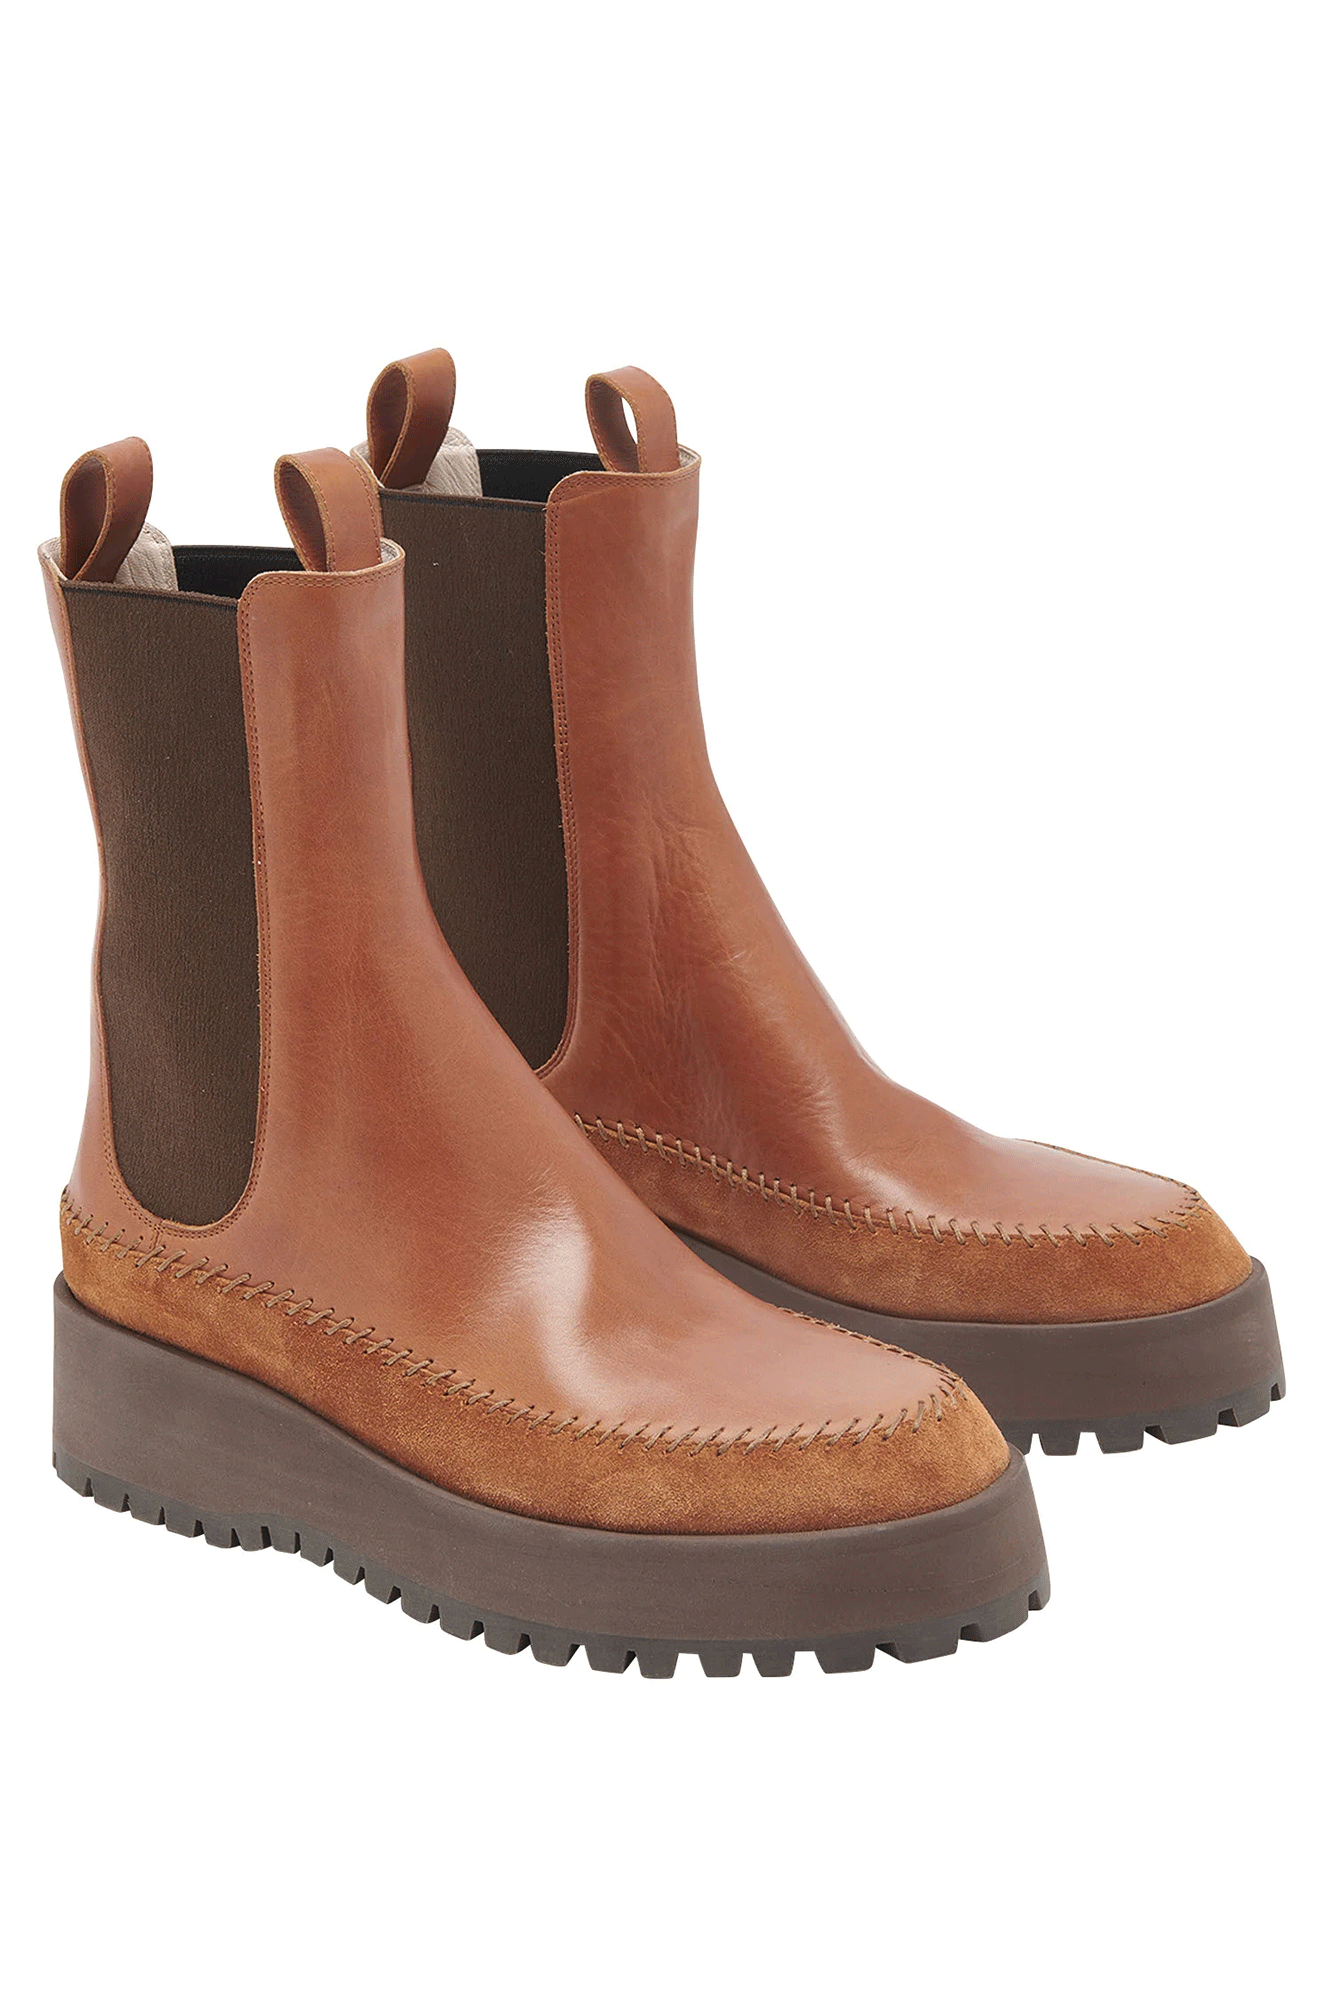 The Jodie Chelsea Lug Sole from Ulla Johnson features a combination of premium leather and suede, resting on a chunky lug sole. An eye-catching brown hue with classic elastic side panels and whipstitched trims make this stylish boot a must-have this season.